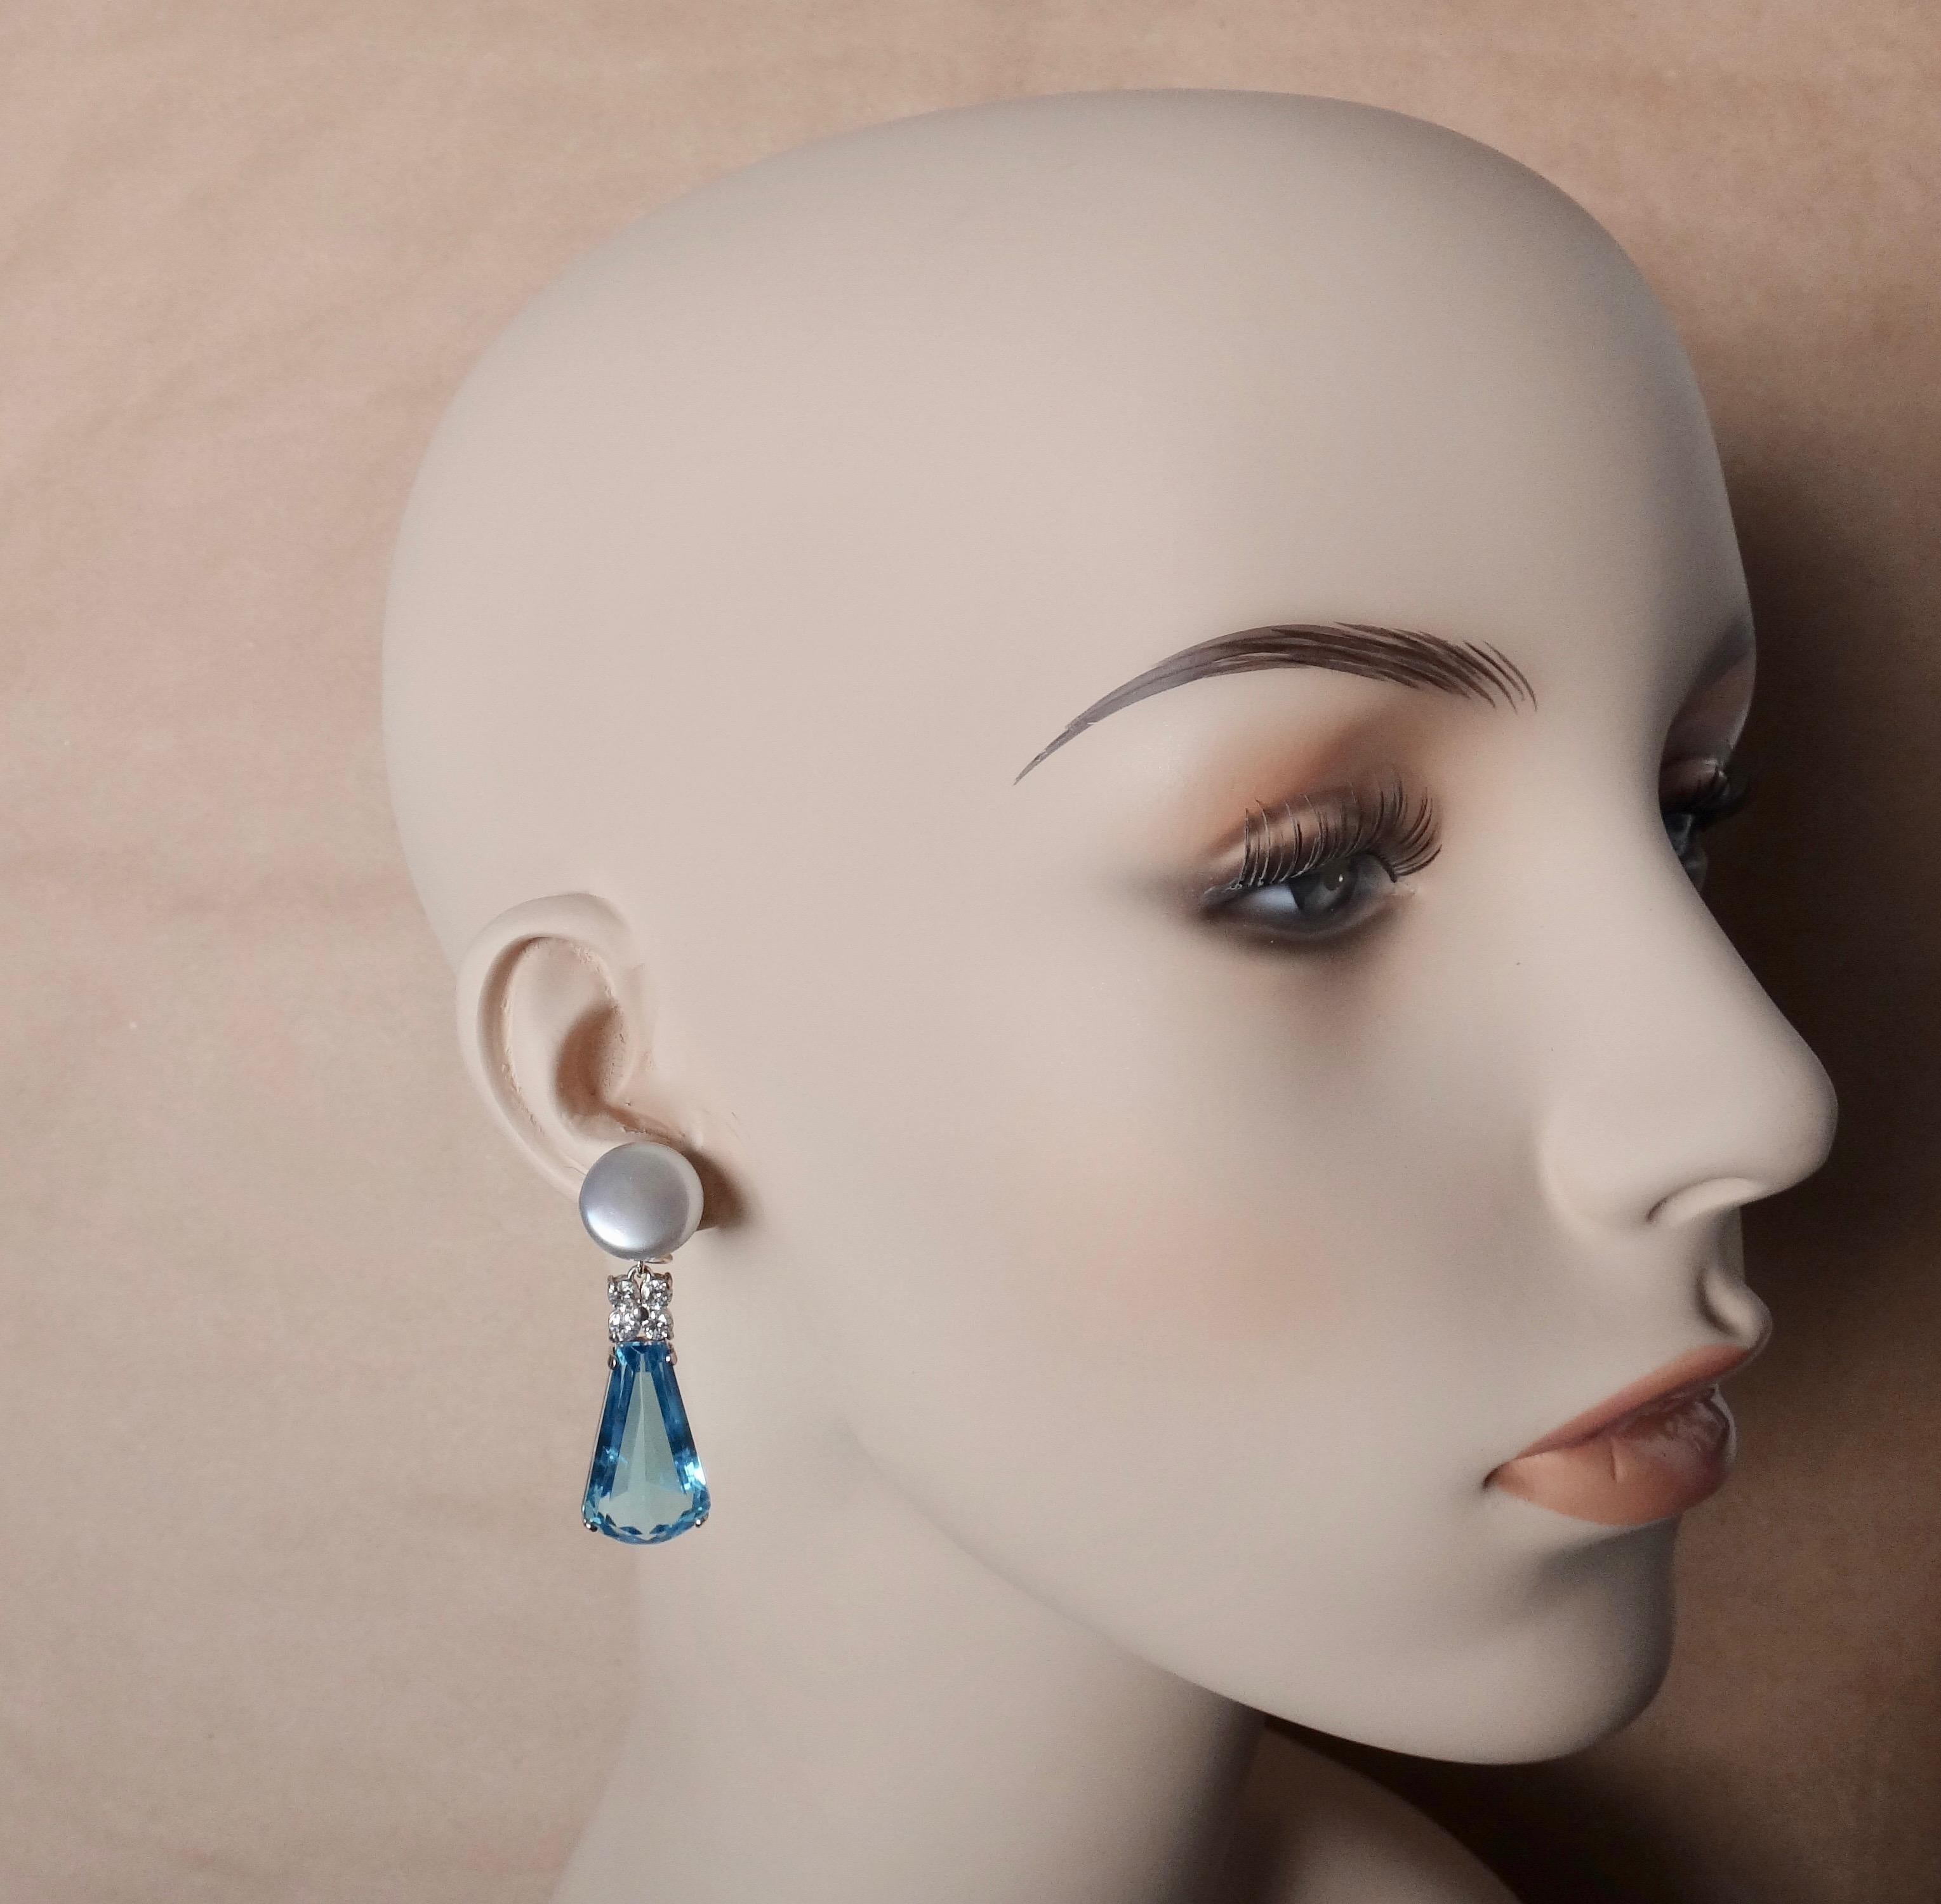 Swiss blue topaz in a whimsical keystone cut are featured in these elegant dangle earrings.  The gems are exceedingly well cut, polished and matched.  The blue topaz are complimented by white diamonds and a pair of 15mm gray toned button pearls of